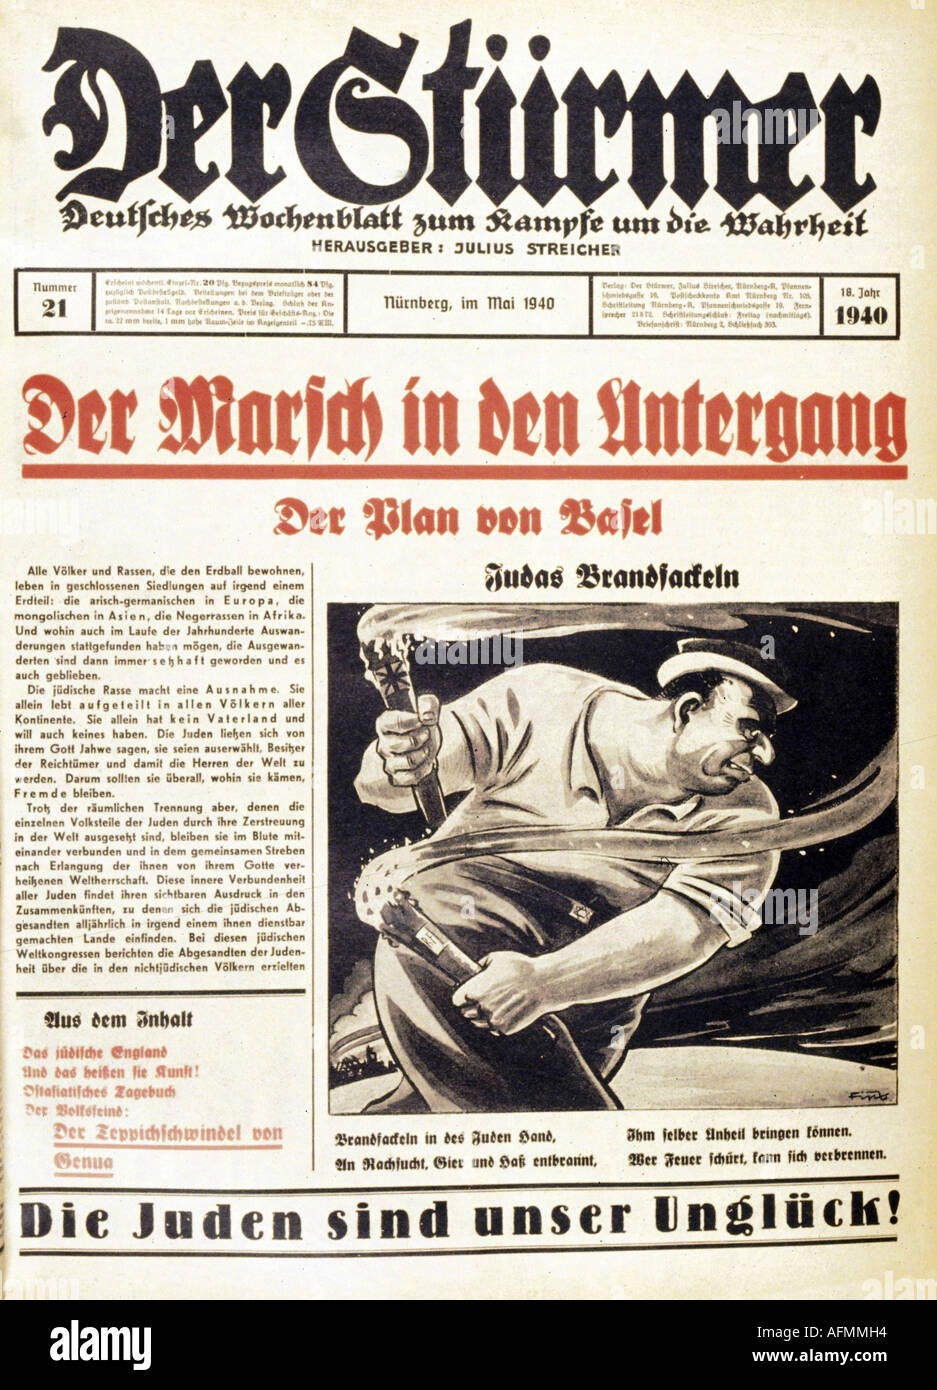 Nazism / National Socialism, press, newspaper "Der Stürmer", number 21, Nuremberg, May 1940, title, caricature by Fips, Stock Photo